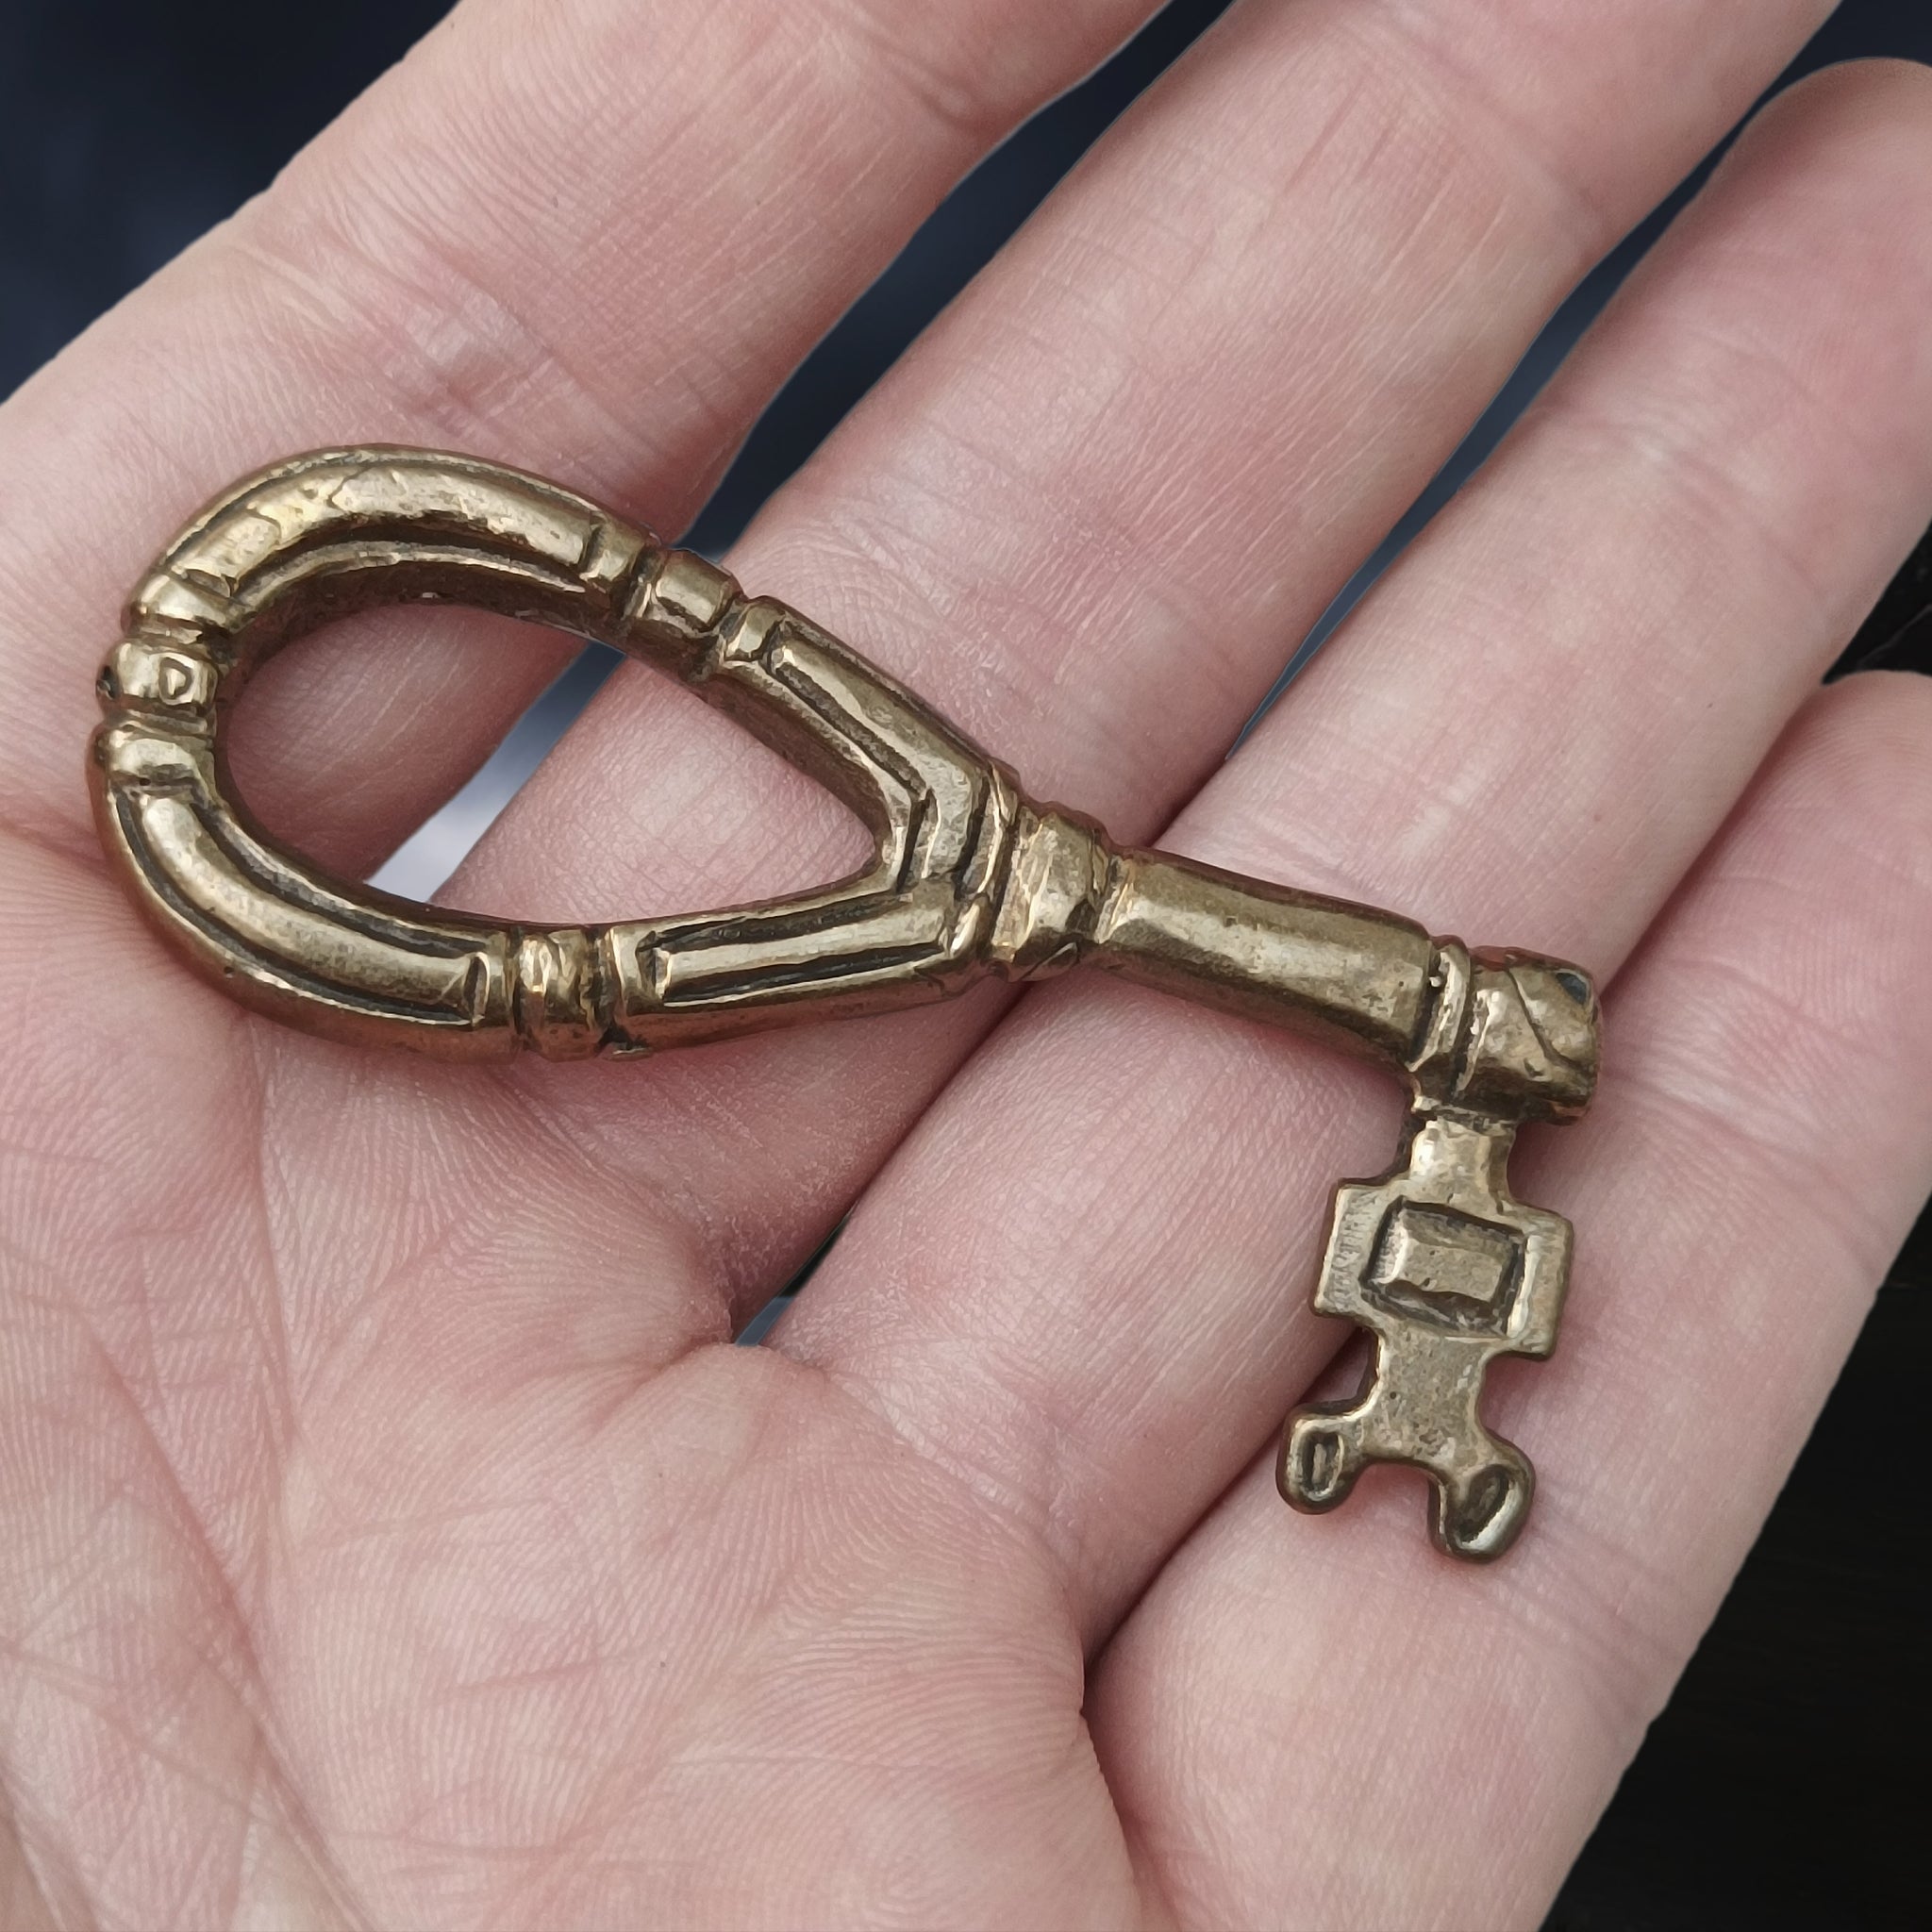 Large round Viking key with decorated design from Sweden on Hand